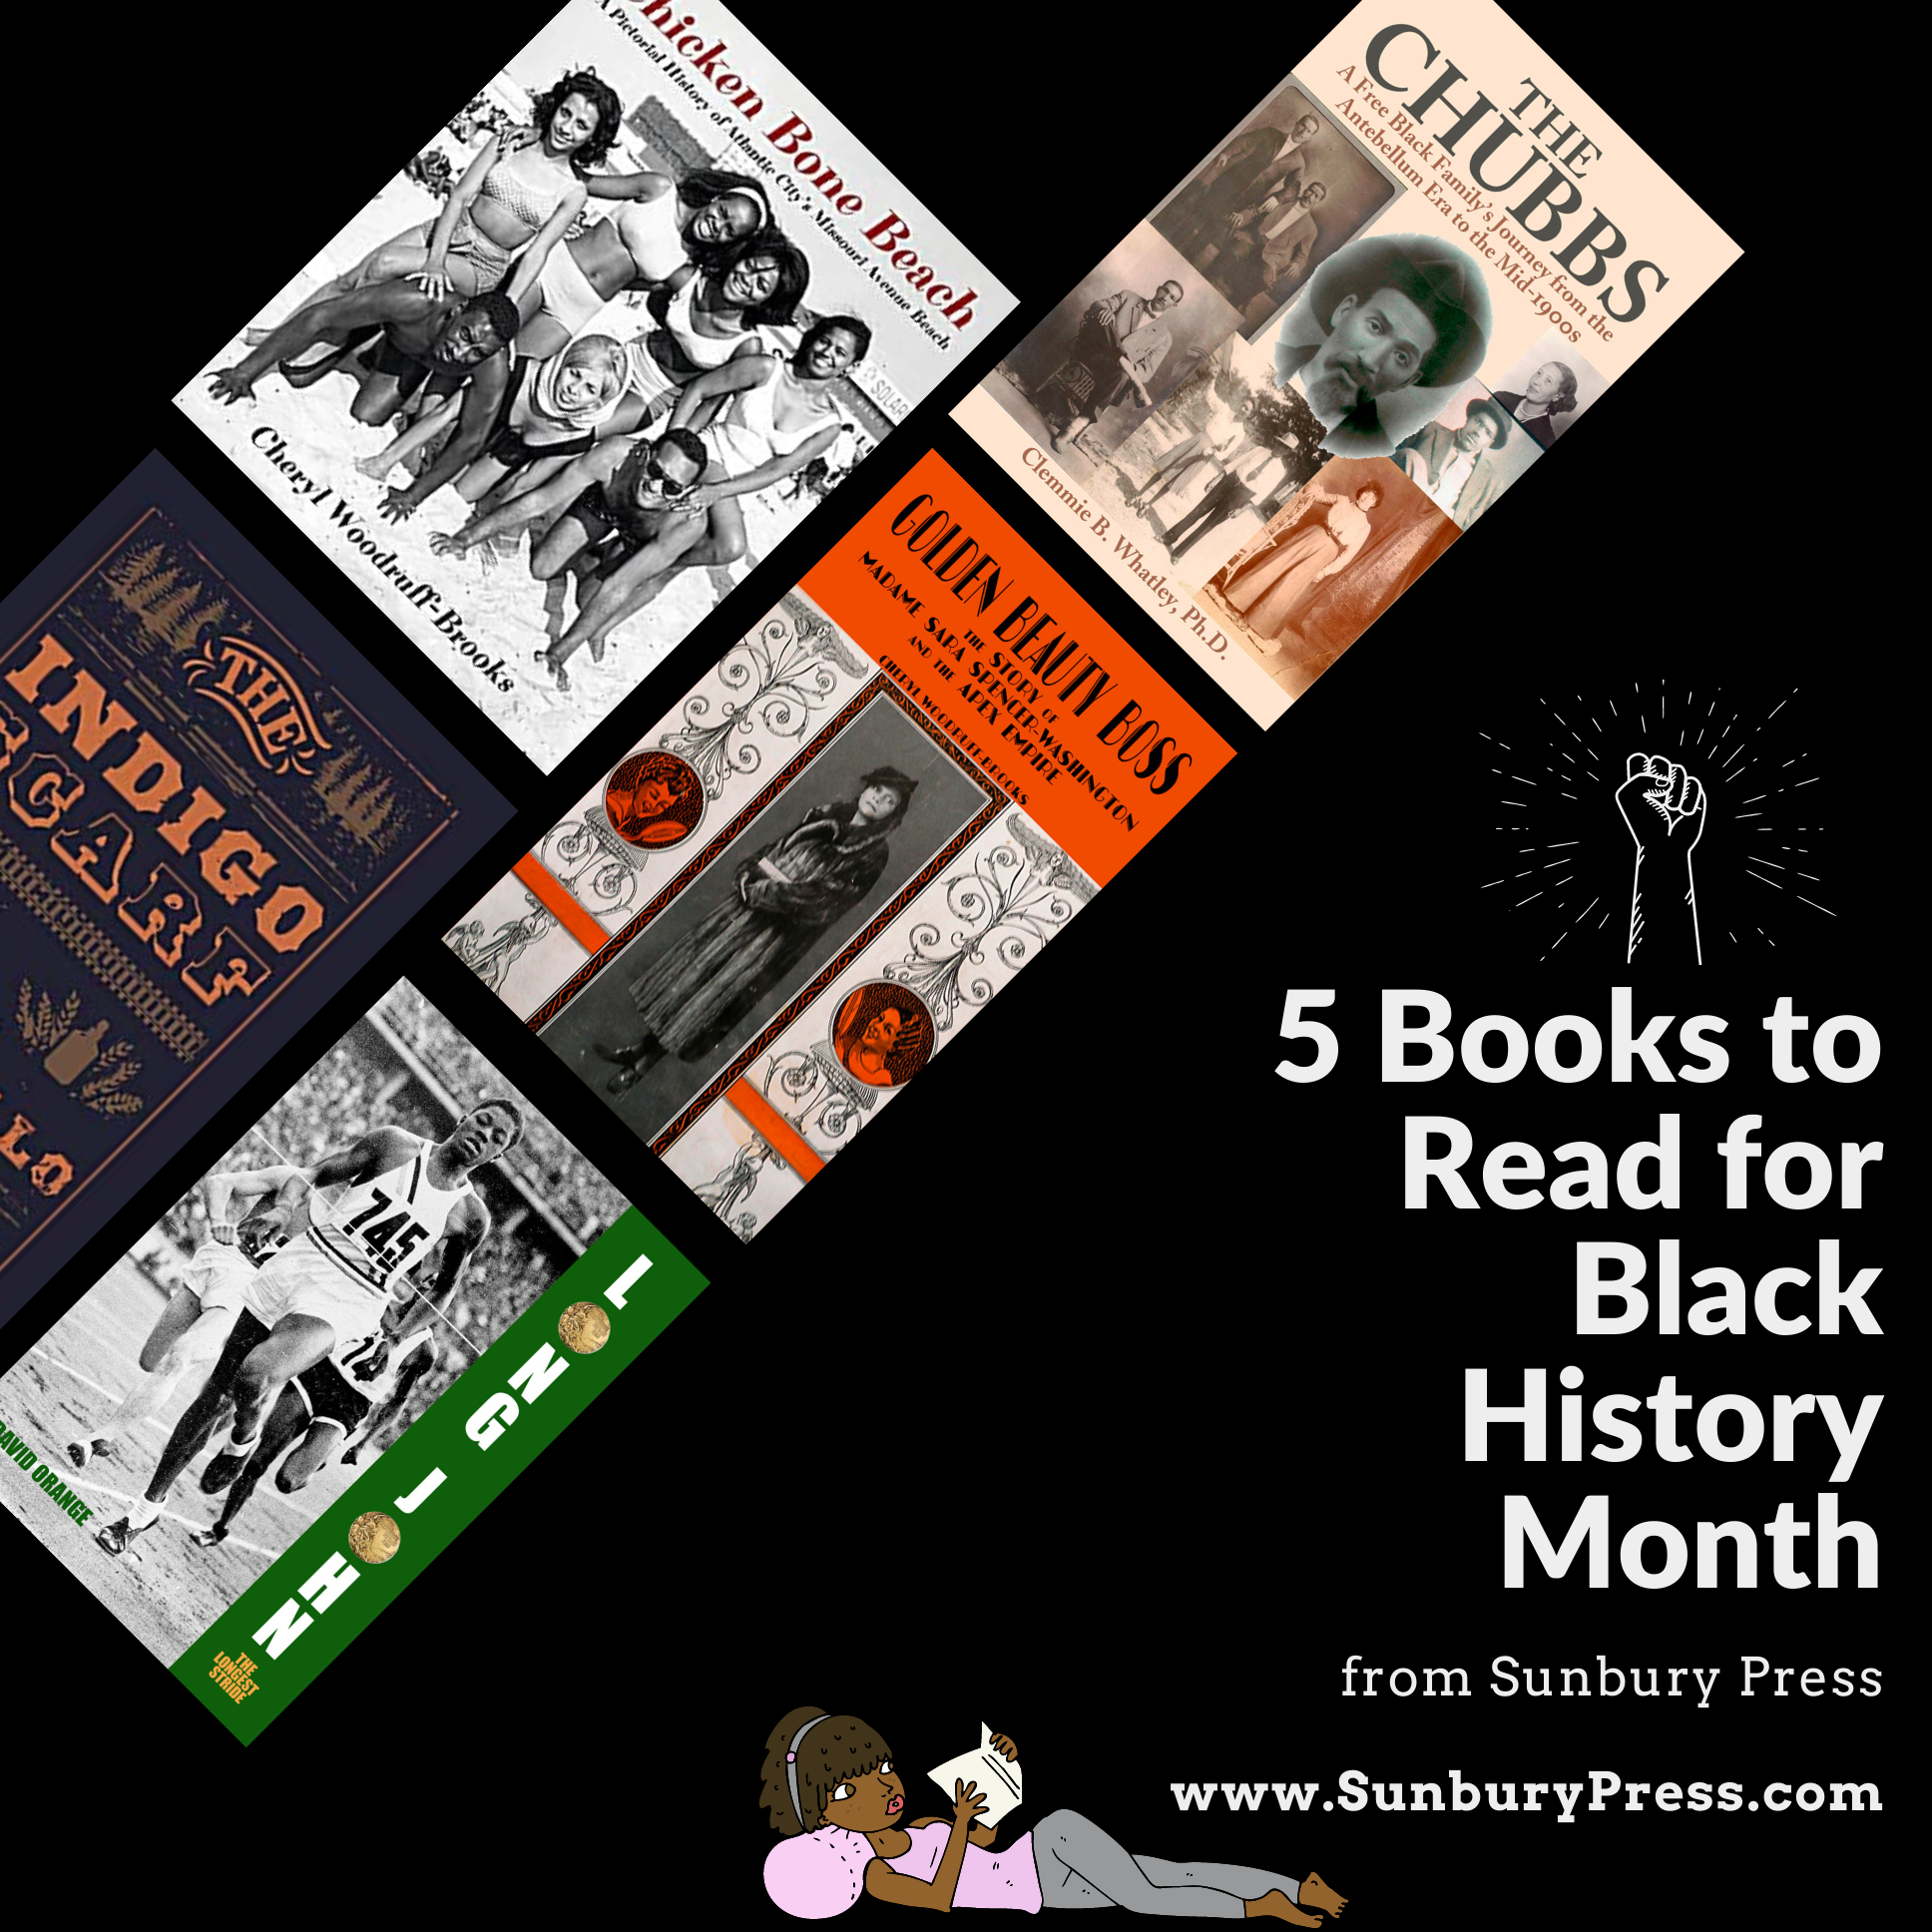 5 Books to Read for Black History Month